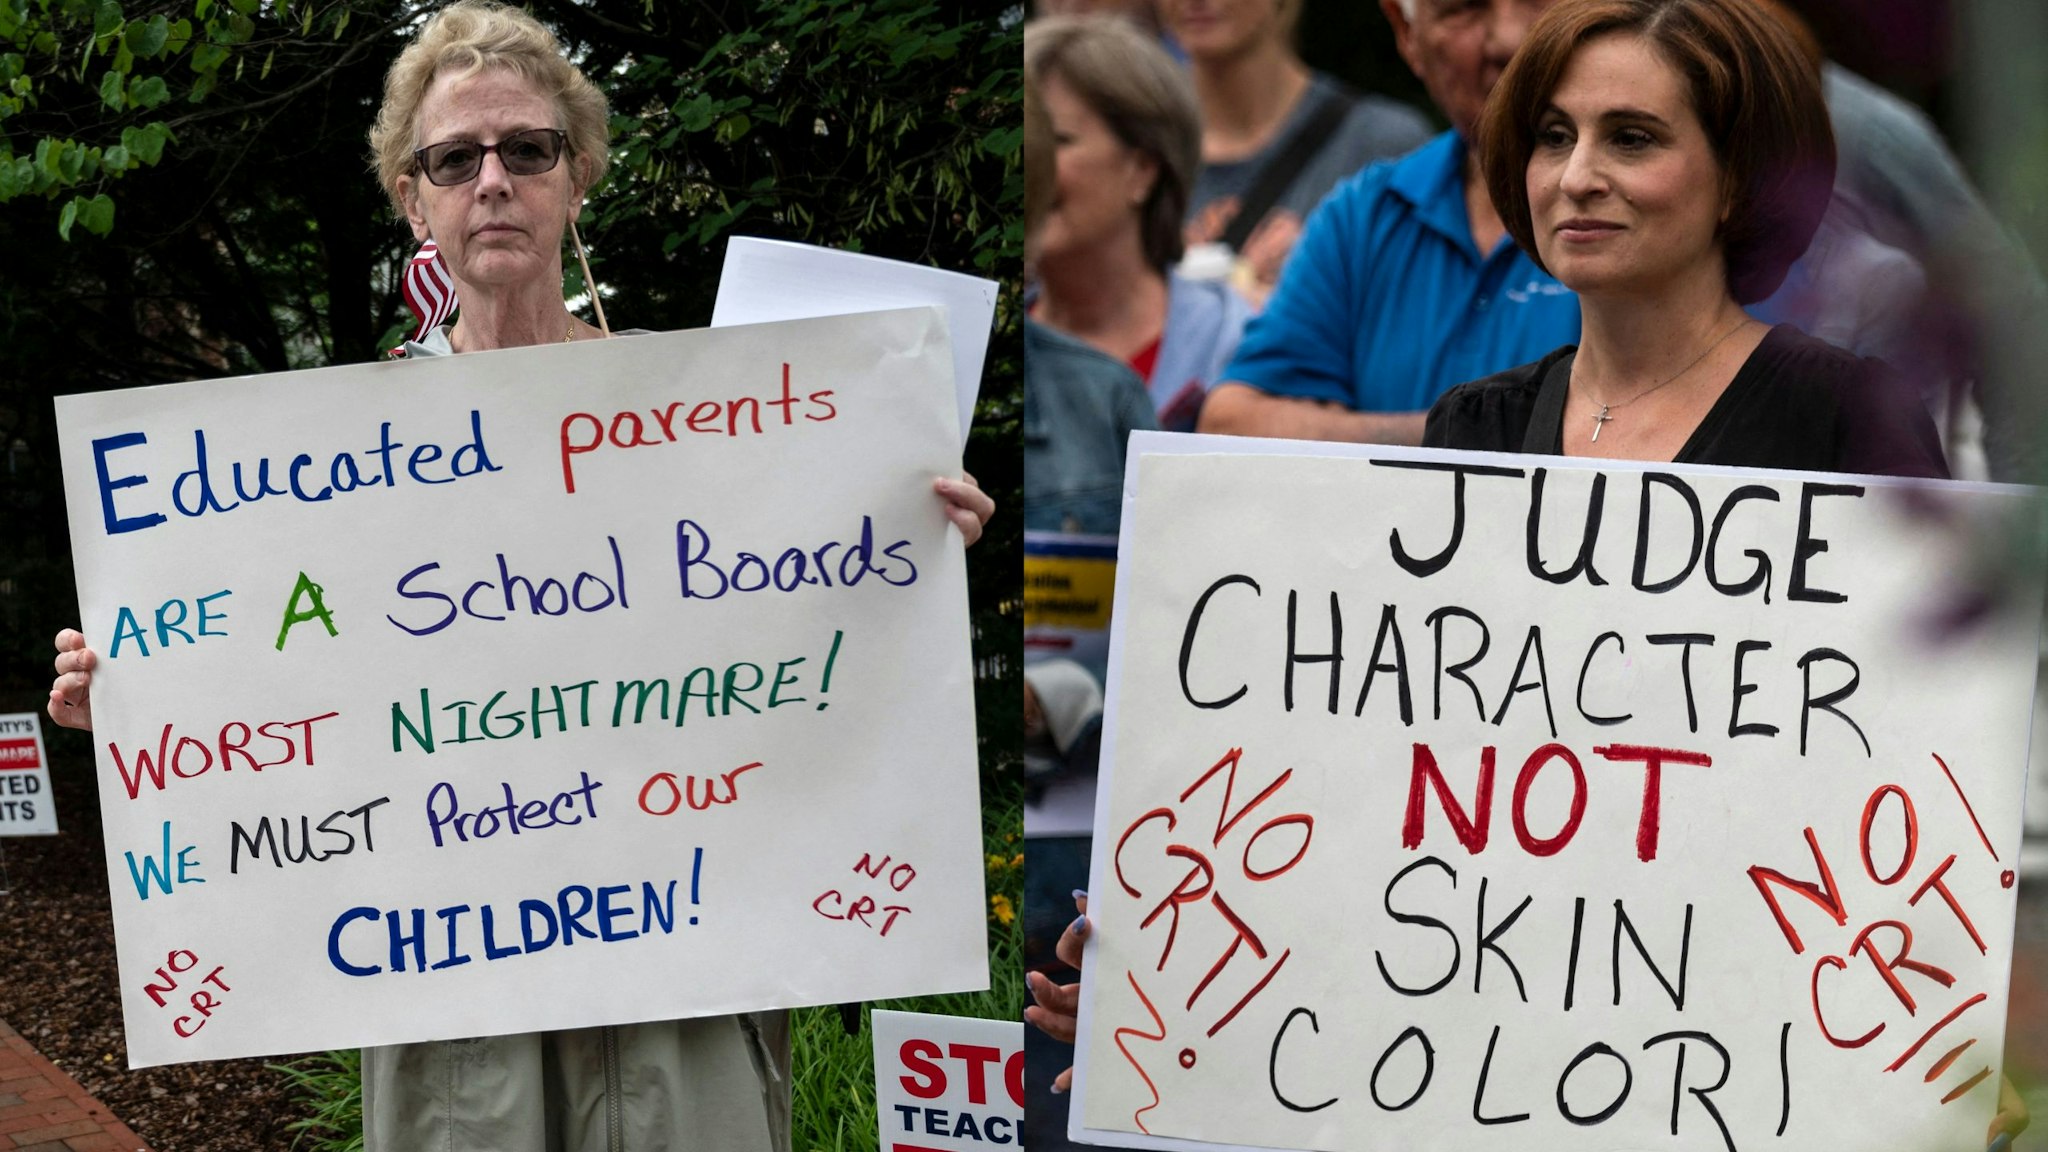 People hold up signs during a rally against "critical race theory" (CRT) being taught in schools at the Loudoun County Government center in Leesburg, Virginia on June 12, 2021. - "Are you ready to take back our schools?" Republican activist Patti Menders shouted at a rally opposing anti-racism teaching that critics like her say trains white children to see themselves as "oppressors." "Yes!", answered in unison the hundreds of demonstrators gathered this weekend near Washington to fight against "critical race theory," the latest battleground of America's ongoing culture wars. The term "critical race theory" defines a strand of thought that appeared in American law schools in the late 1970s and which looks at racism as a system, enabled by laws and institutions, rather than at the level of individual prejudices. But critics use it as a catch-all phrase that attacks teachers' efforts to confront dark episodes in American history, including slavery and segregation, as well as to tackle racist stereotypes.